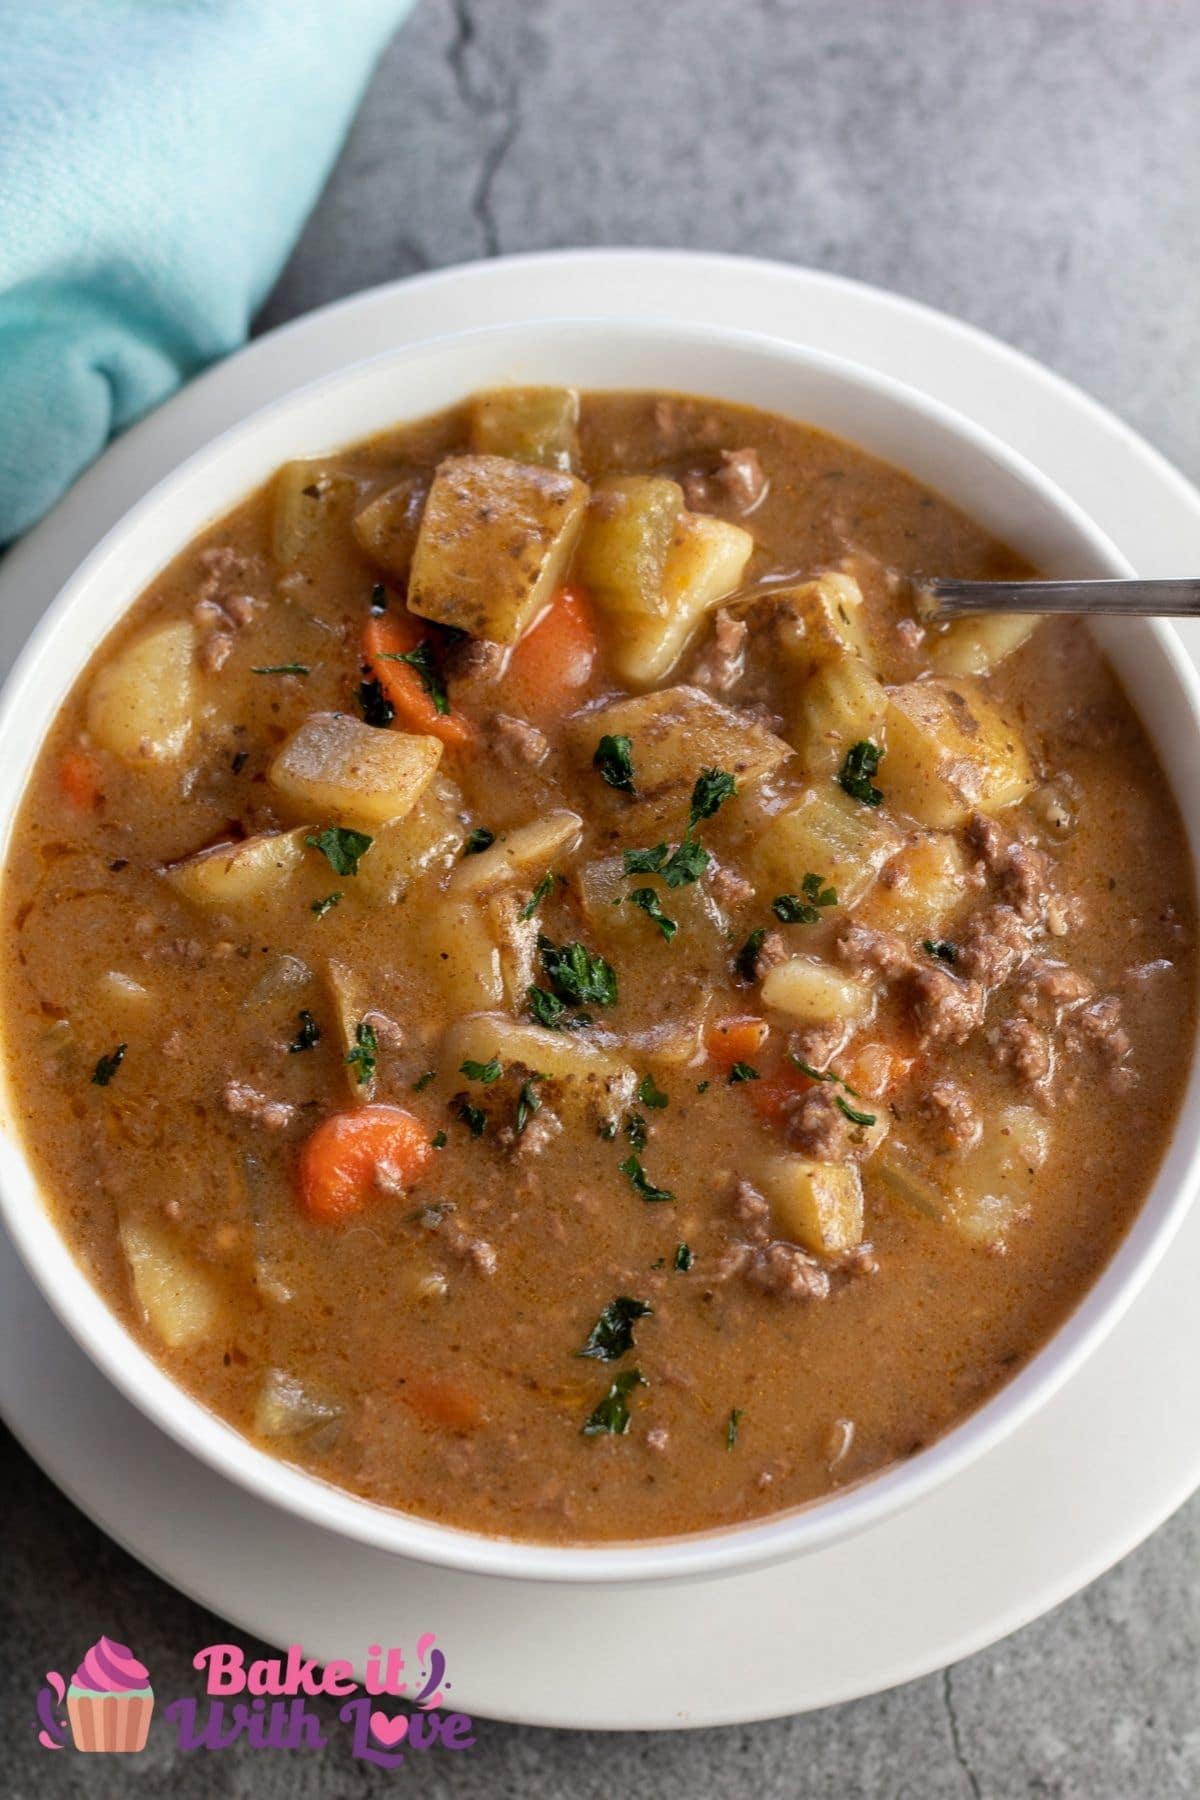 Tall image of a white bowl of ground beef stew.